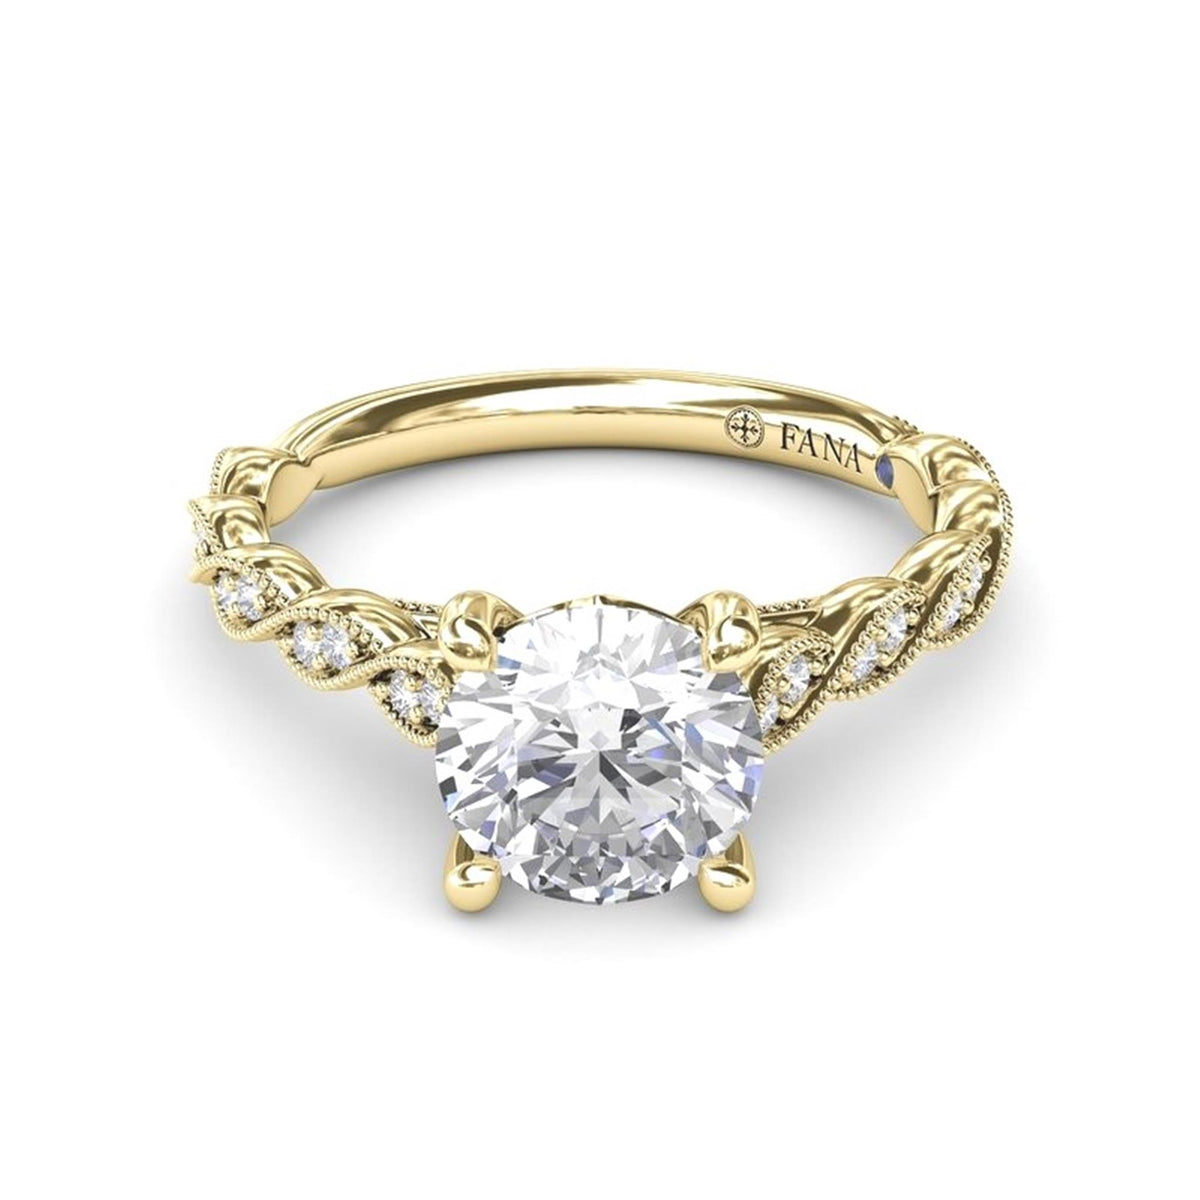 14K Vintage Inspired Engagement Ring Semi-Mount with .16cttw Natural Diamonds